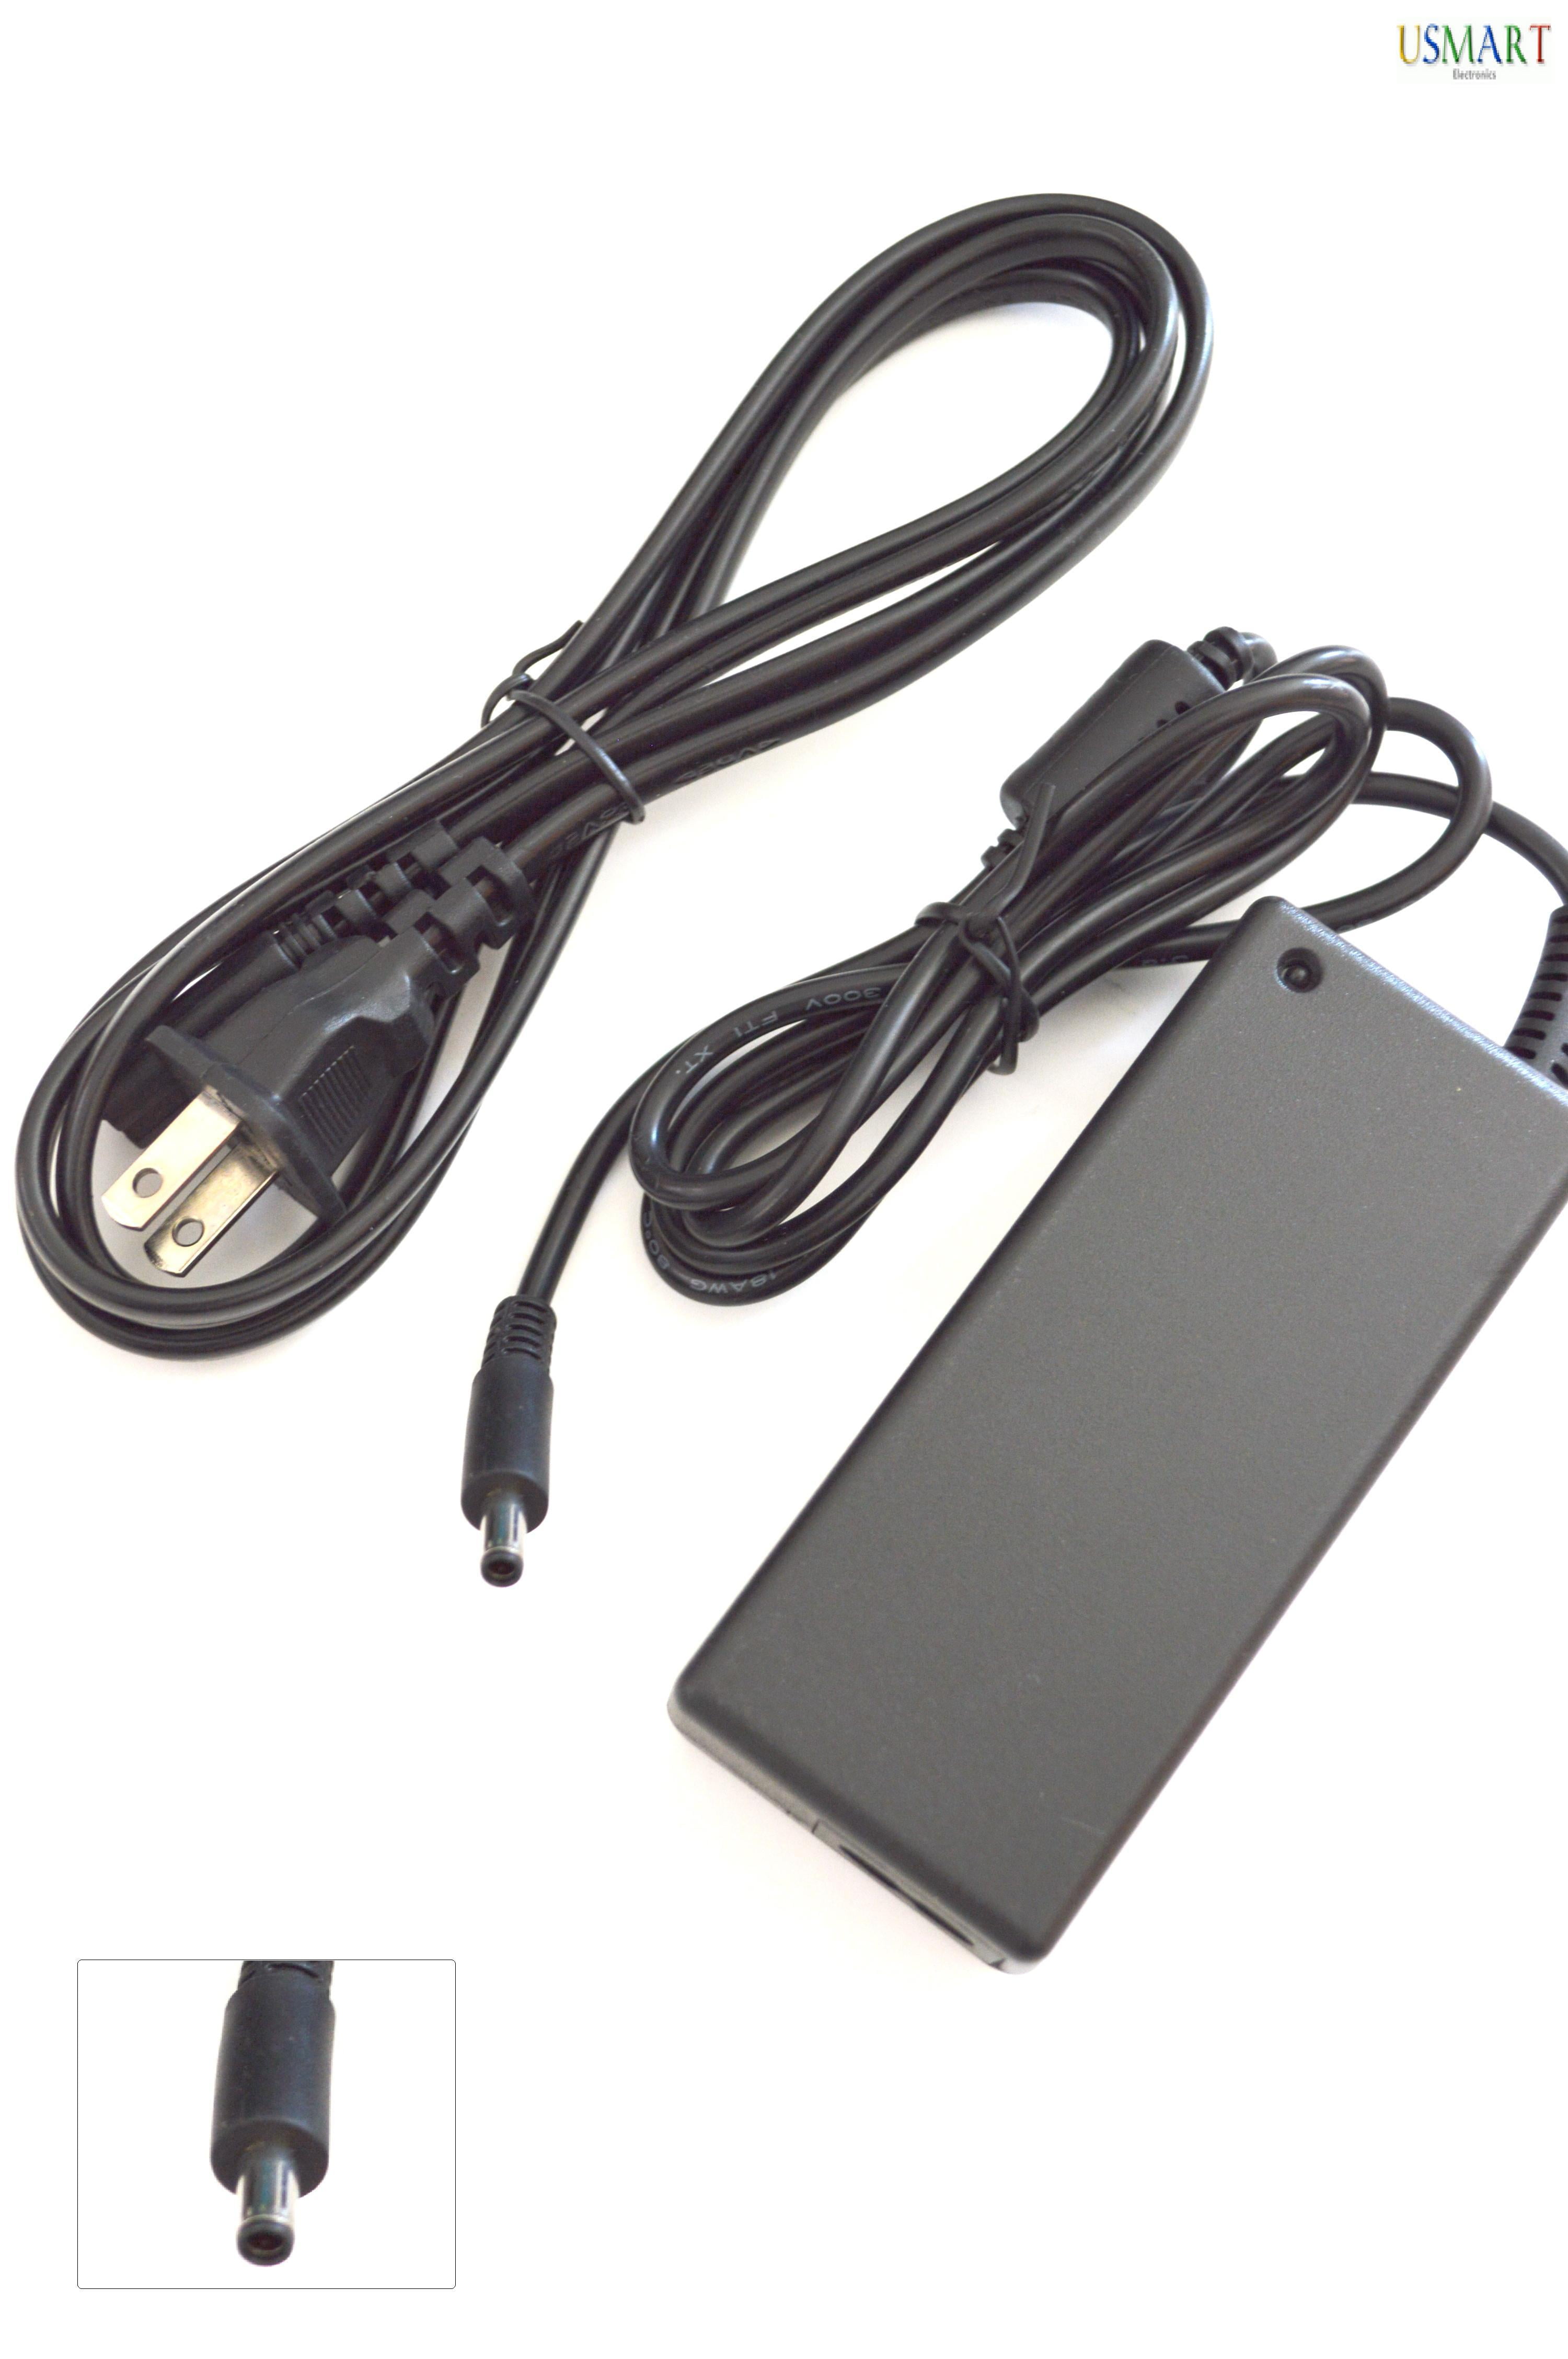 Ac Adapter Laptop Charger for DELL Inspiron 11 3000 3147  i3147-3750sLV;XPS13ULT-7857sLV, 11 3147 i3147 i3147-3750sLV i31473750sLV,  11 i3147-3751SLV i31473751SLV I3147-3752SLV